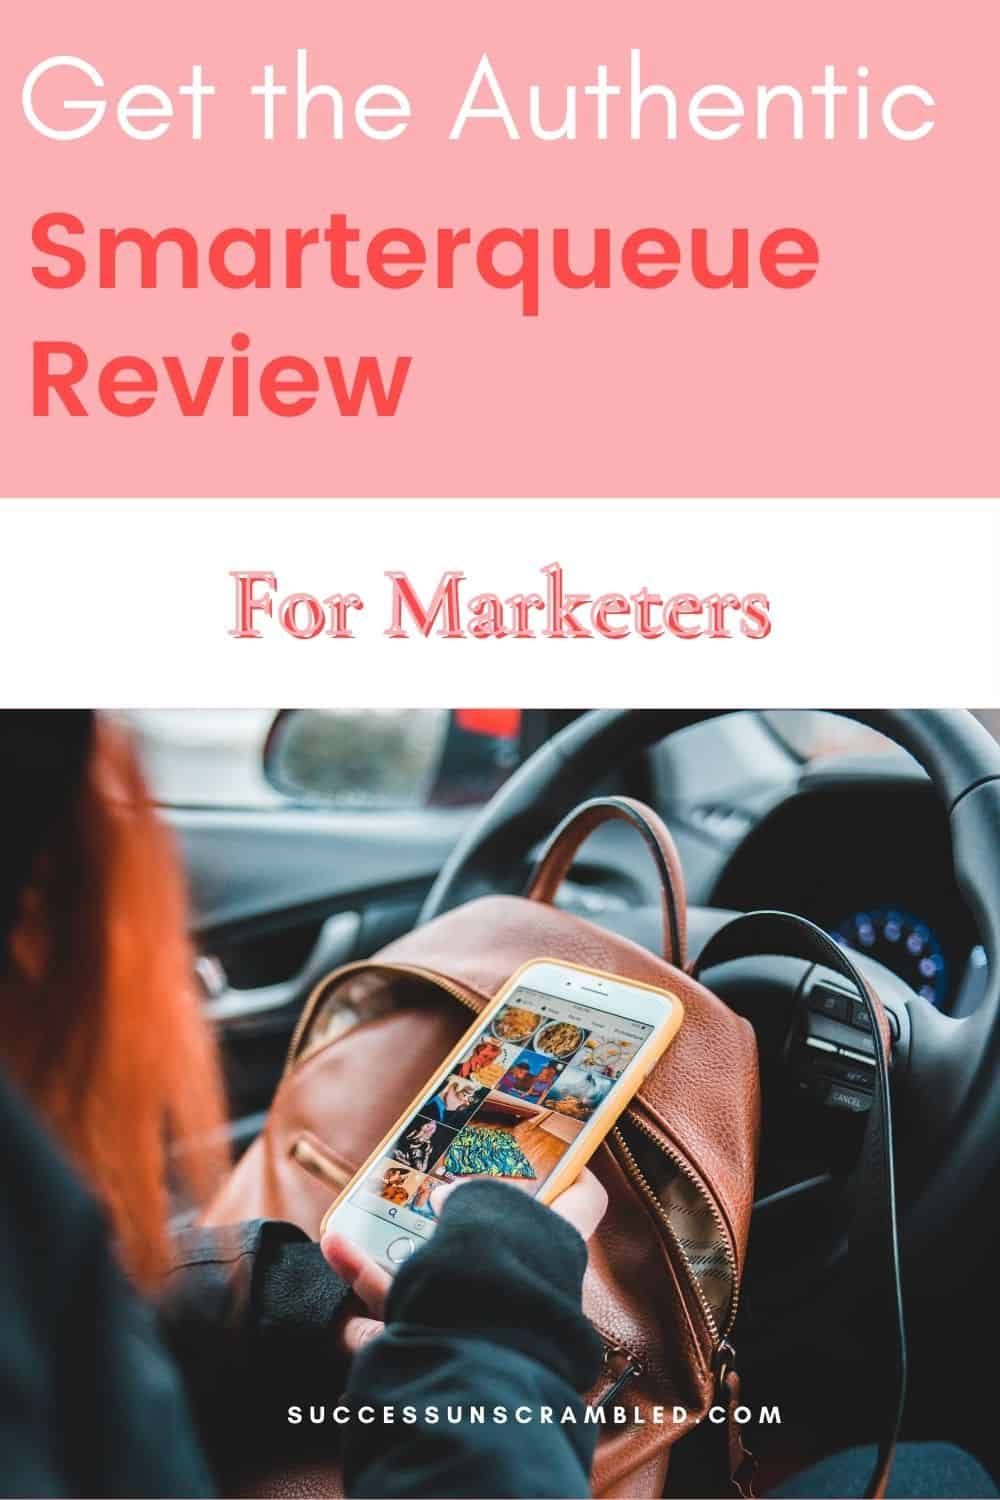 Get the authentic smarterqueue review for marketers pin